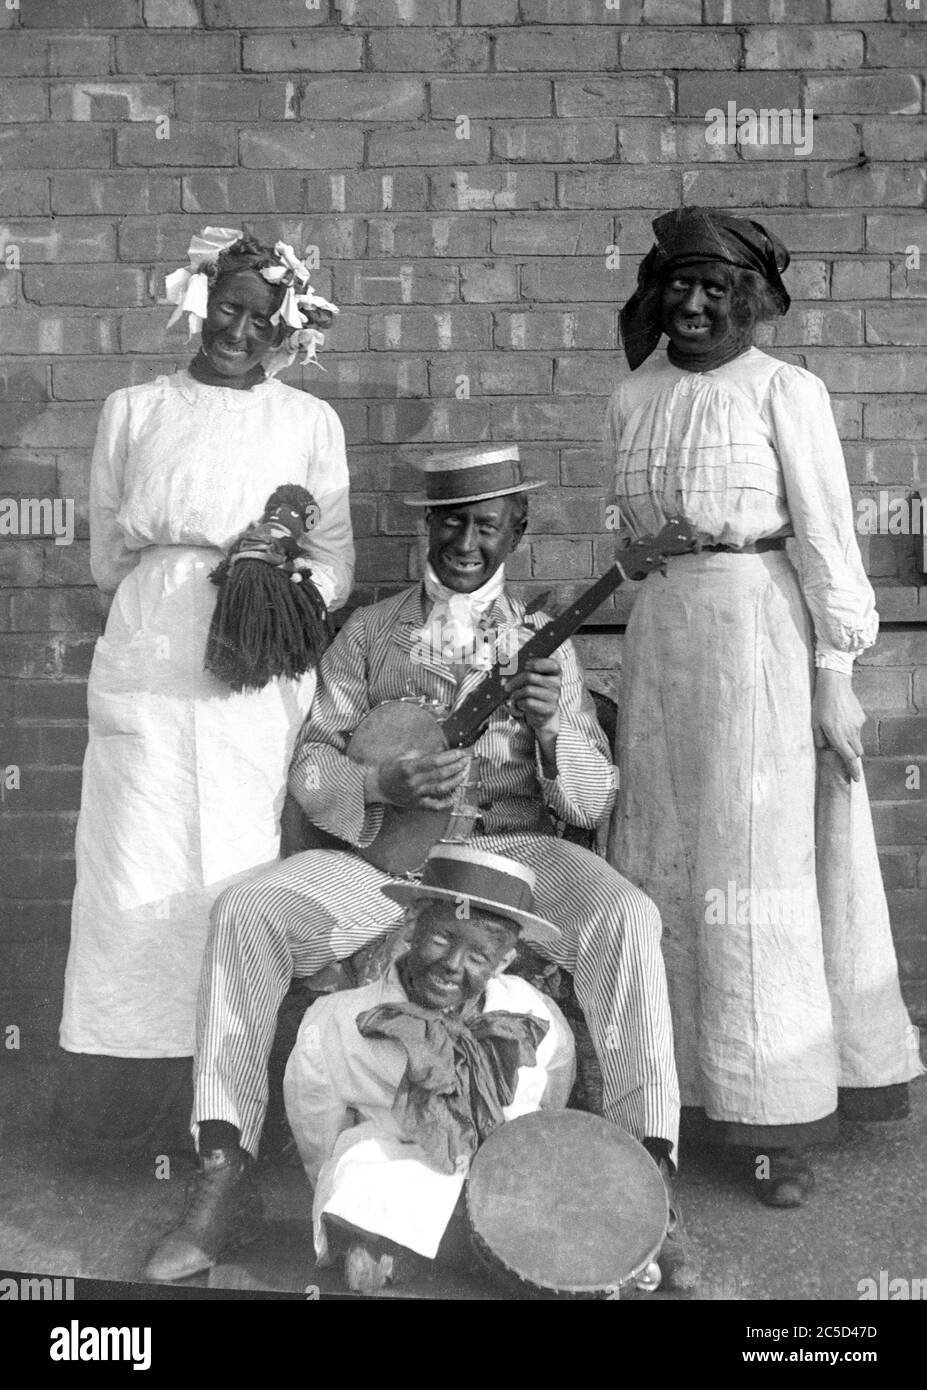 Archive image of children in blackface circa 1930, with instruments. Stock Photo